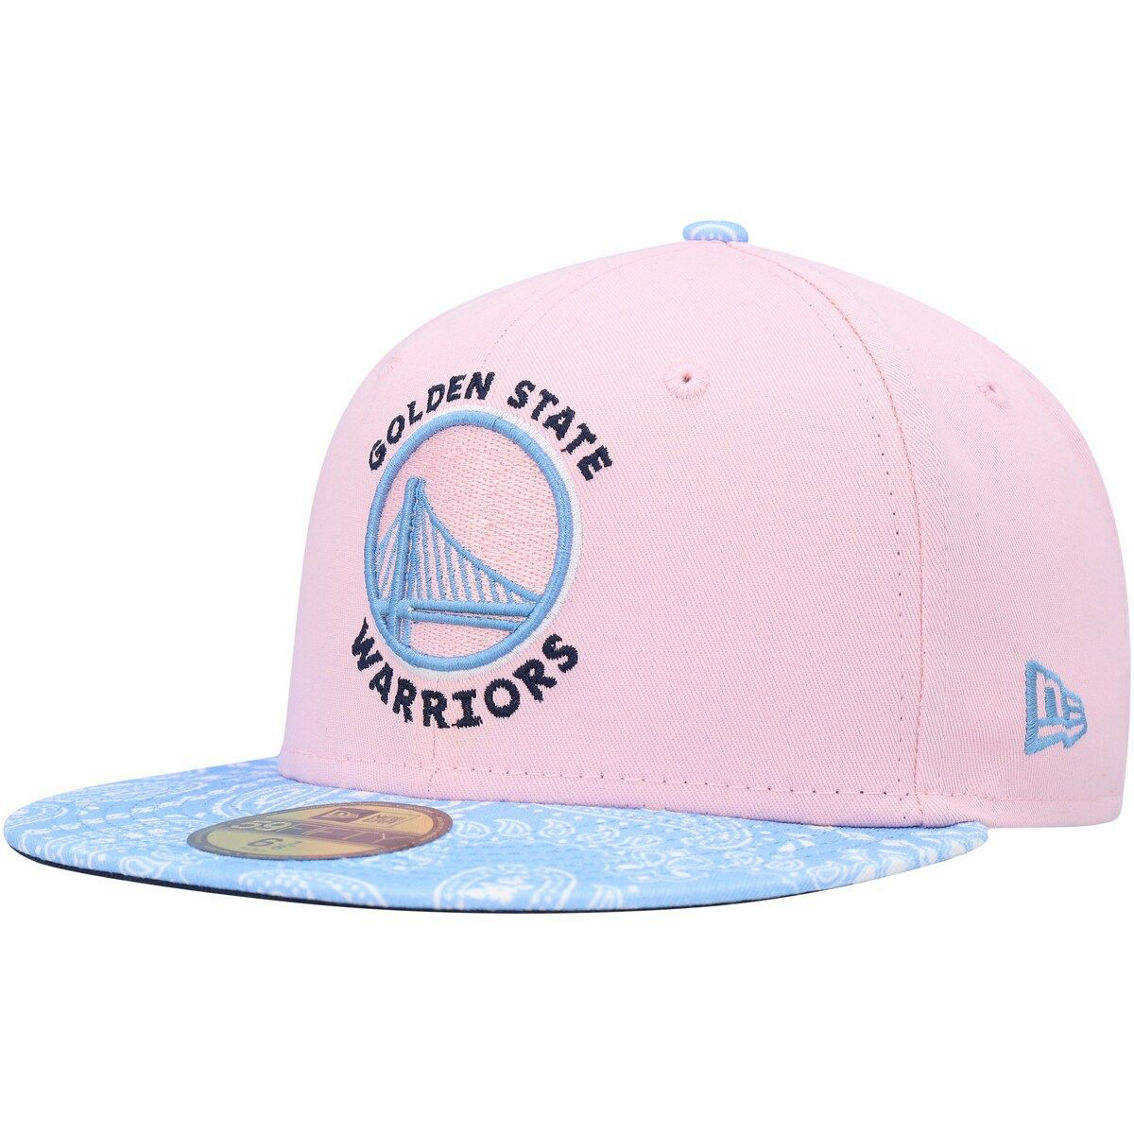 New Era Men's Pink/Light Blue Golden State Warriors Paisley Visor 59FIFTY Fitted Hat - Image 4 of 4